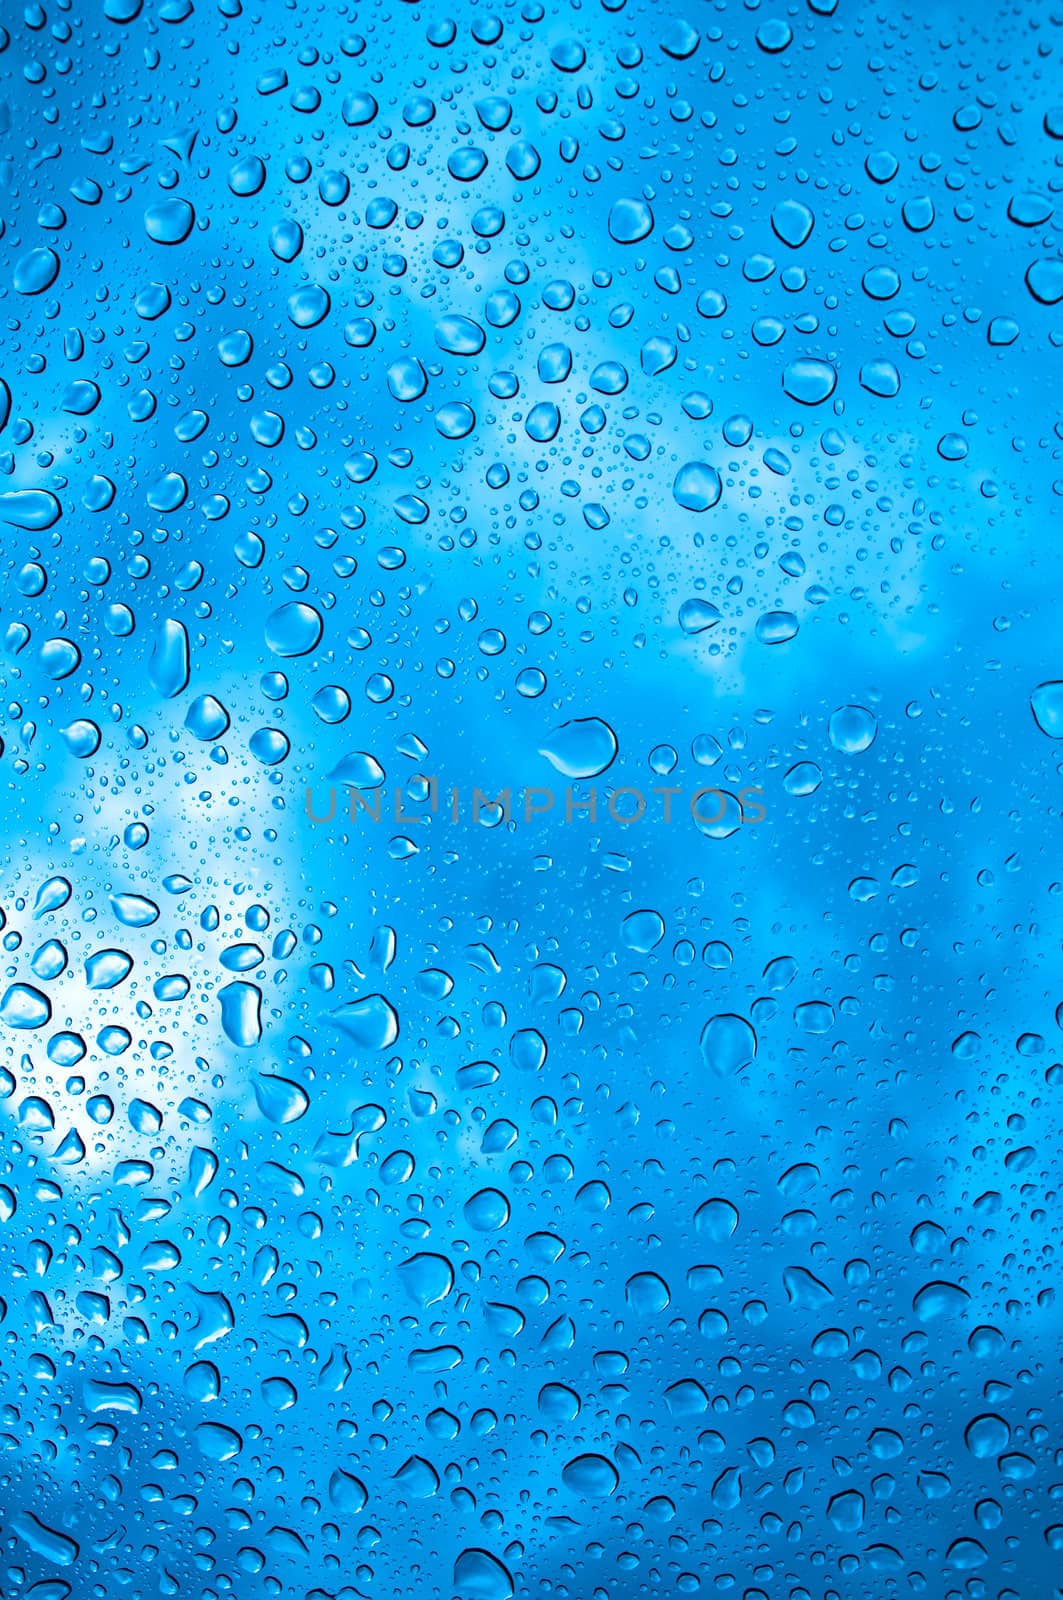 background image of rain drops on glass with a bright blue cooling color behind